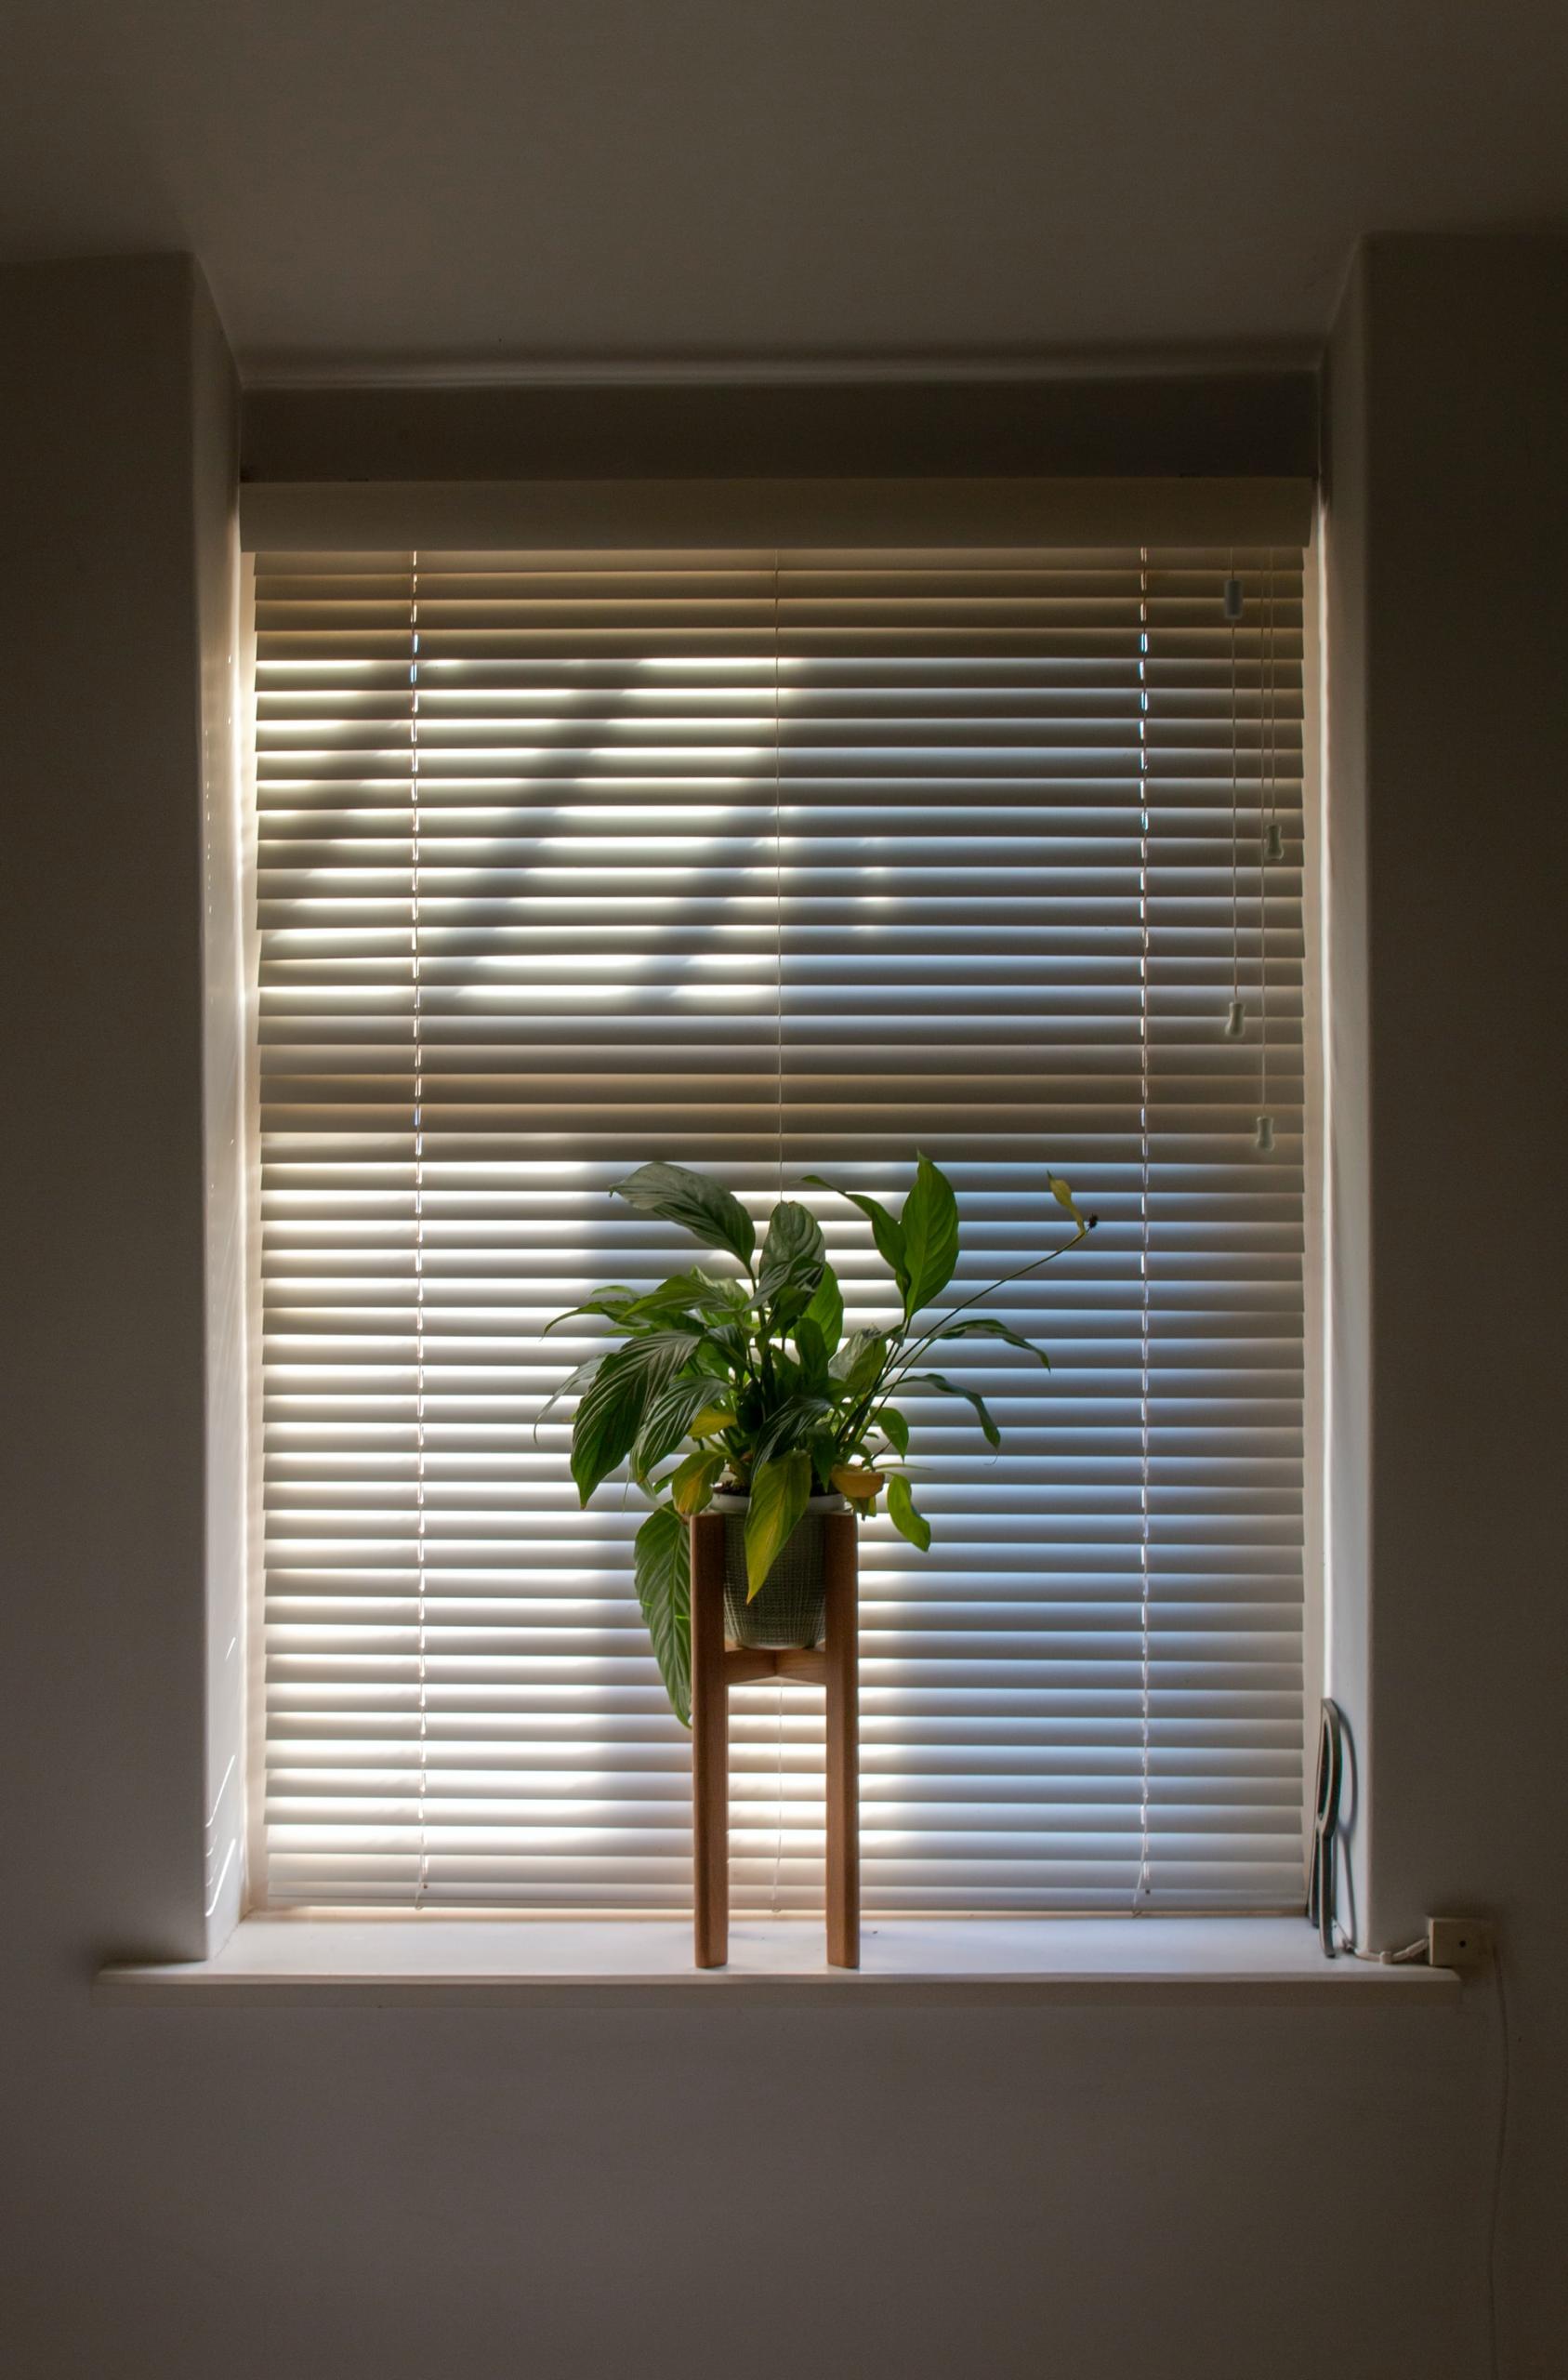 Local in-home window blinds covers design evaluation service in Escondido